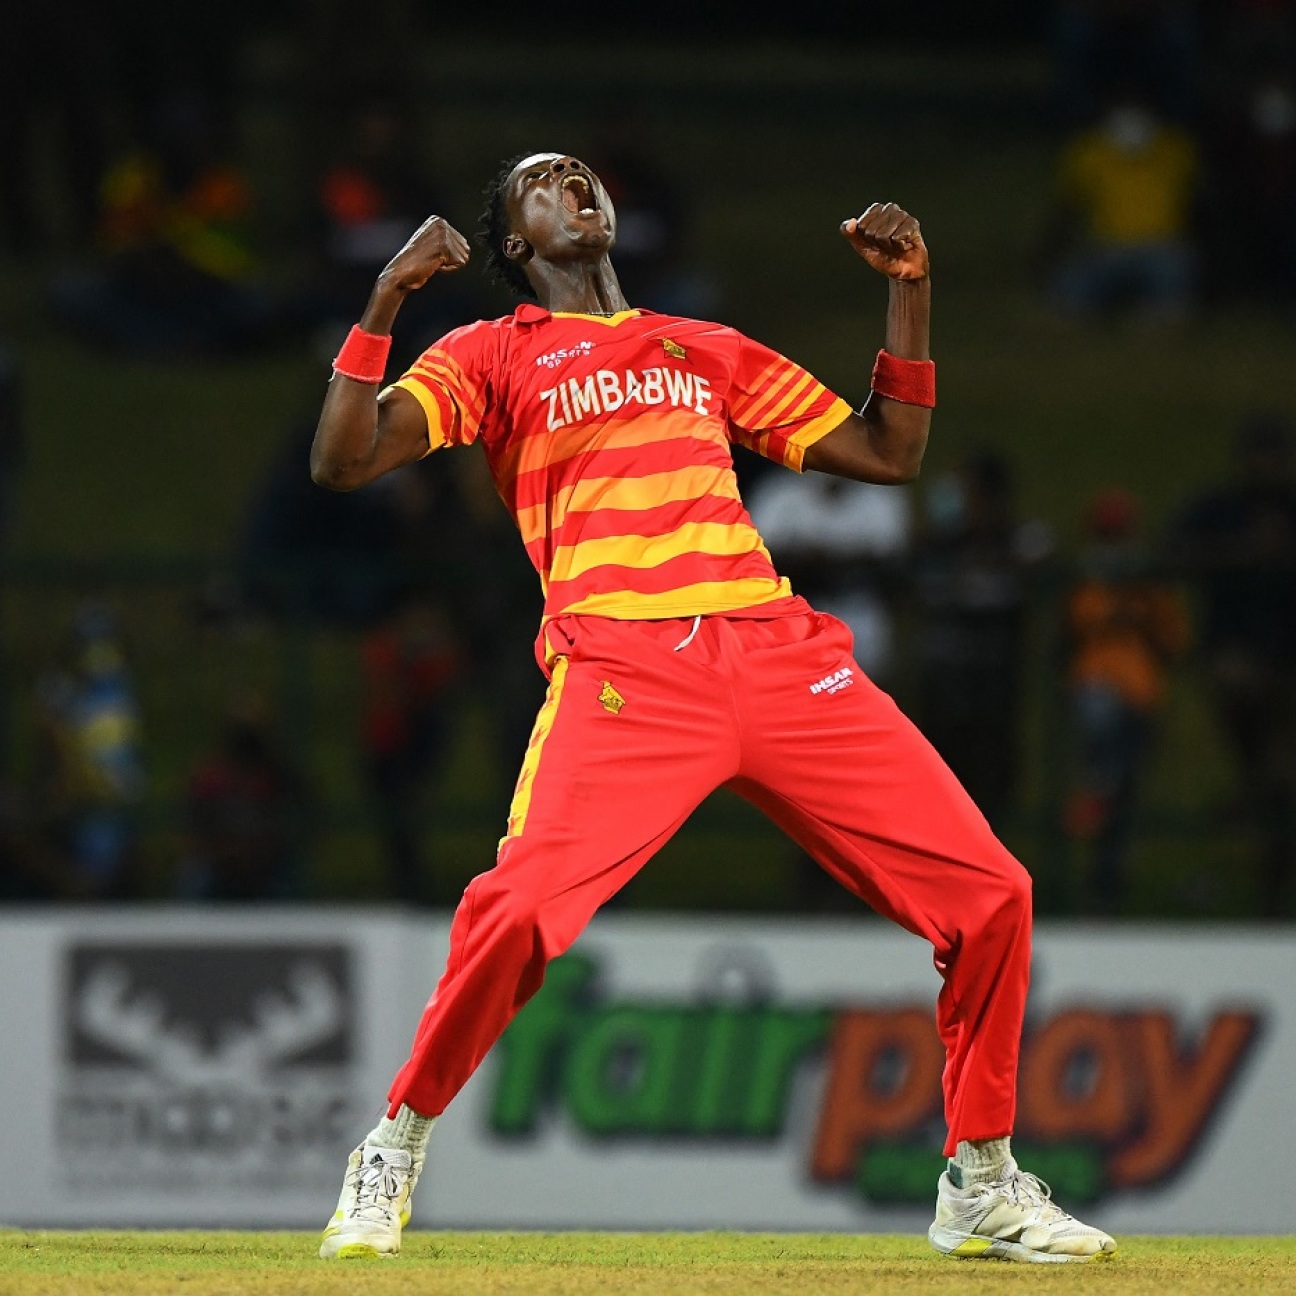 IPL 2022: Lucknow Super Giants Sign Blessing Muzarabani As Mark Wood’s Replacement – Reports